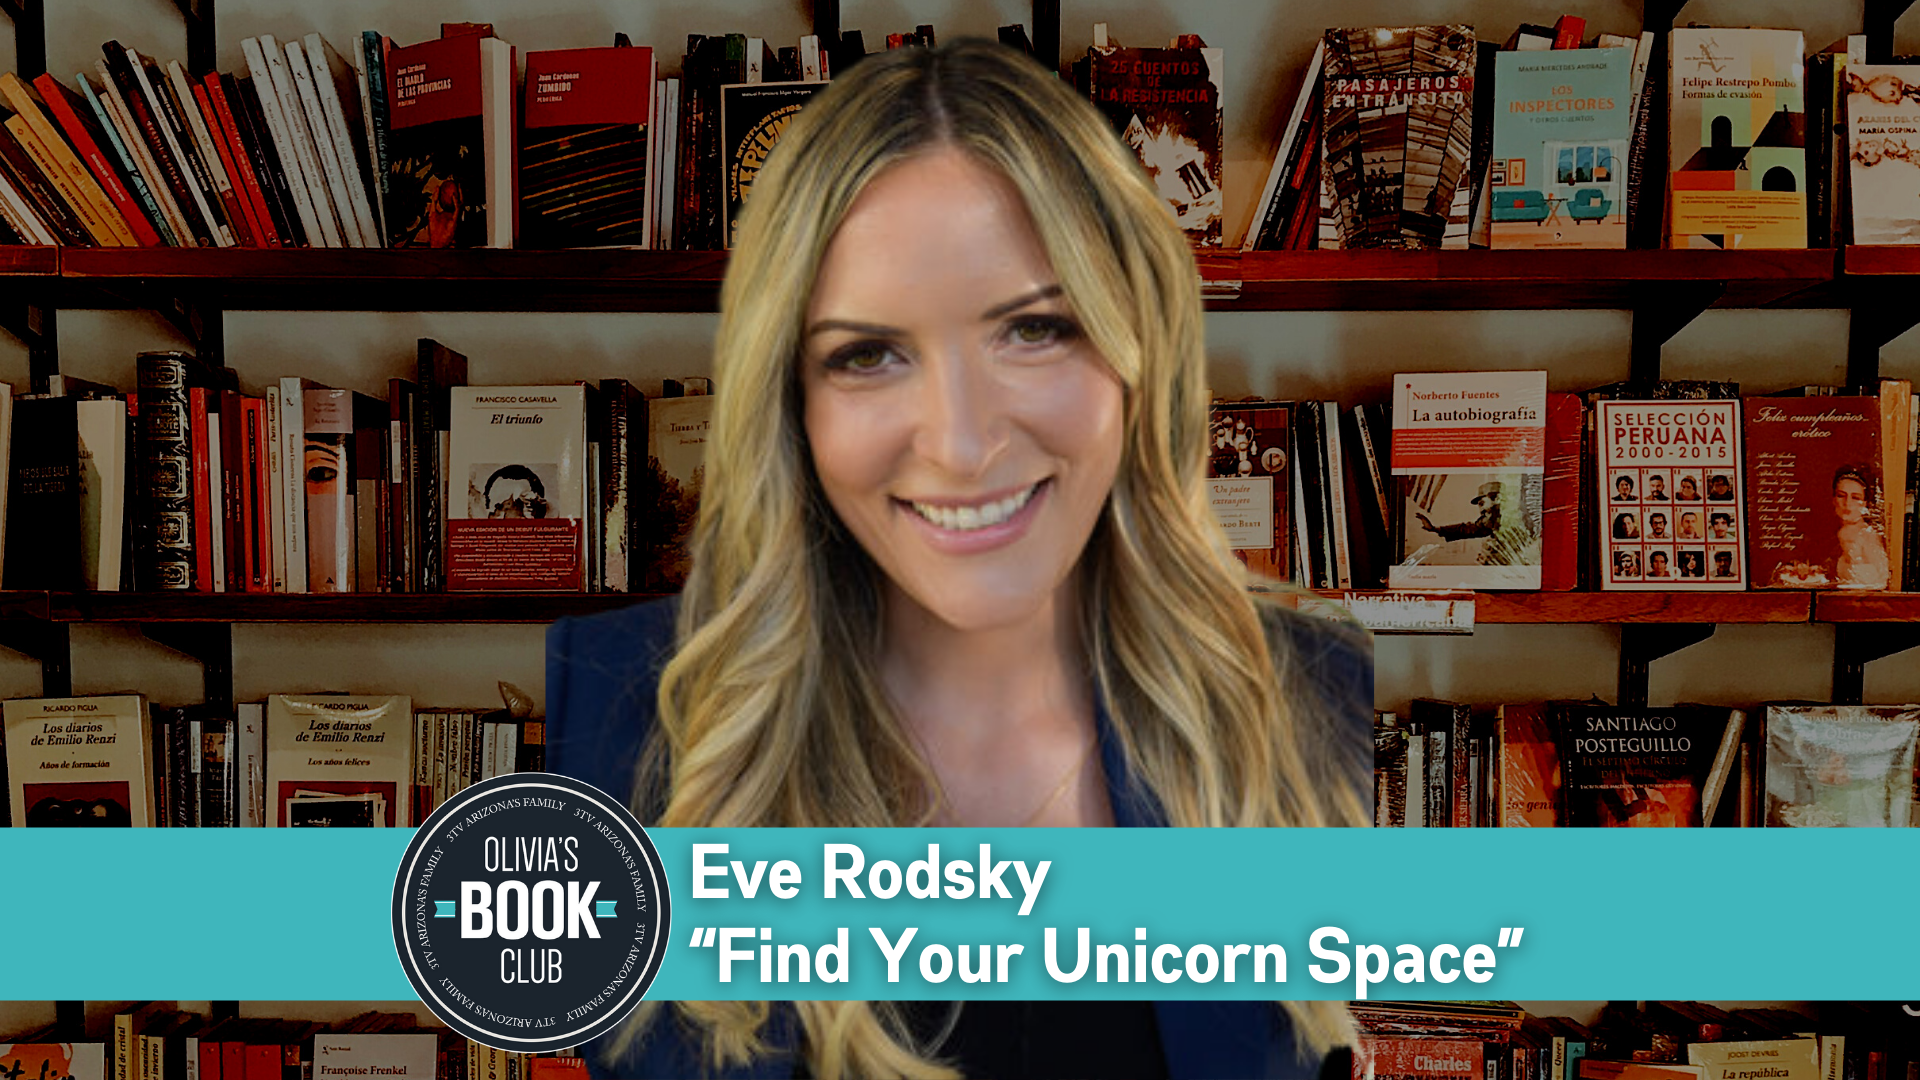 Ash Taylor Gay Porn - Olivia's Book Club: Eve Rodsky, 'Find Your Unicorn Space'